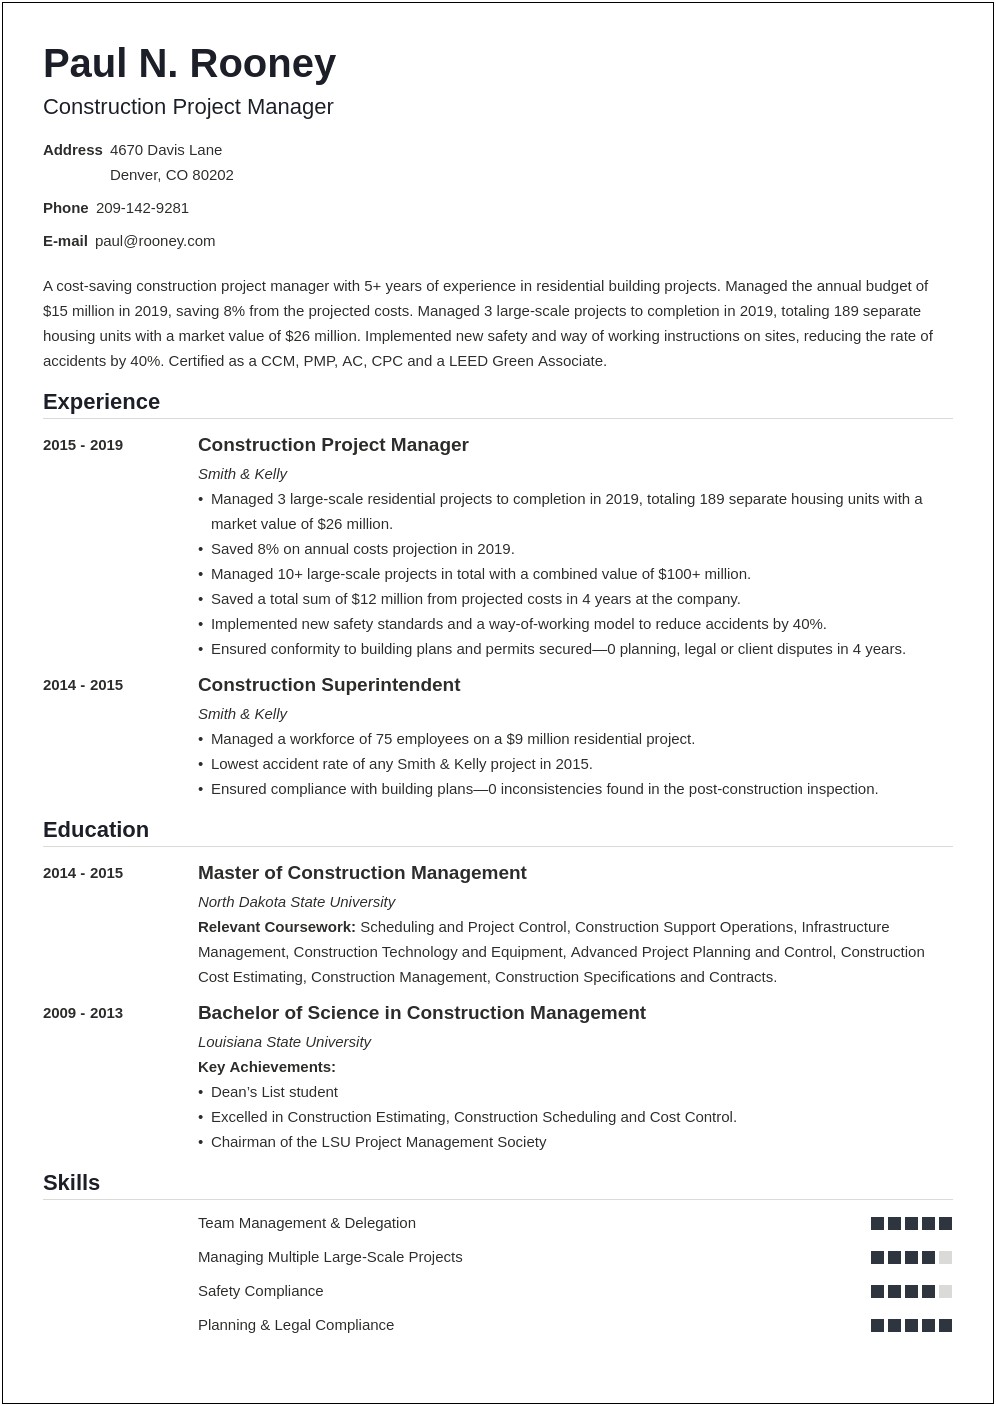 Resume Intro Paragraph Project Manager Assistant